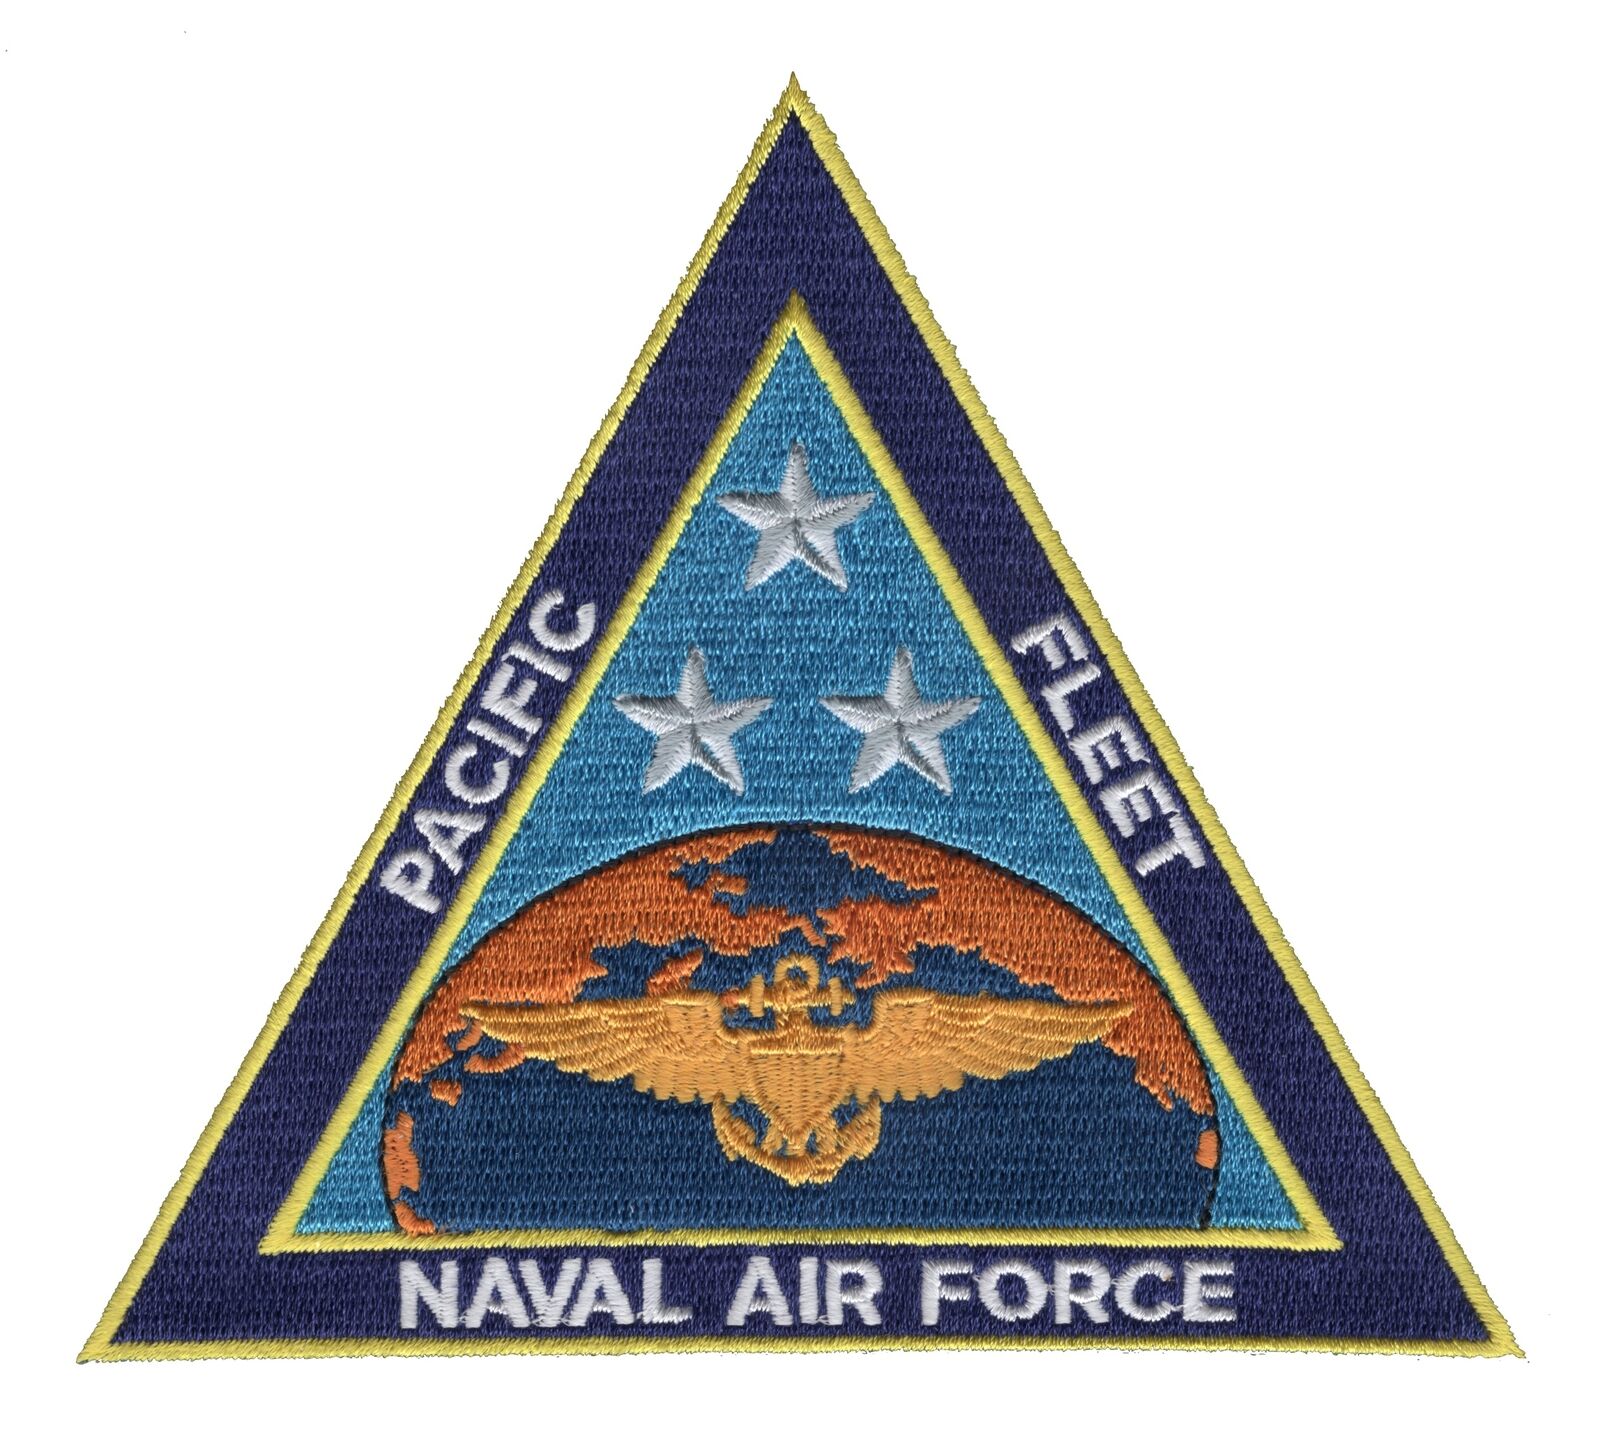 Naval Air Force - Pacific Fleet Patch